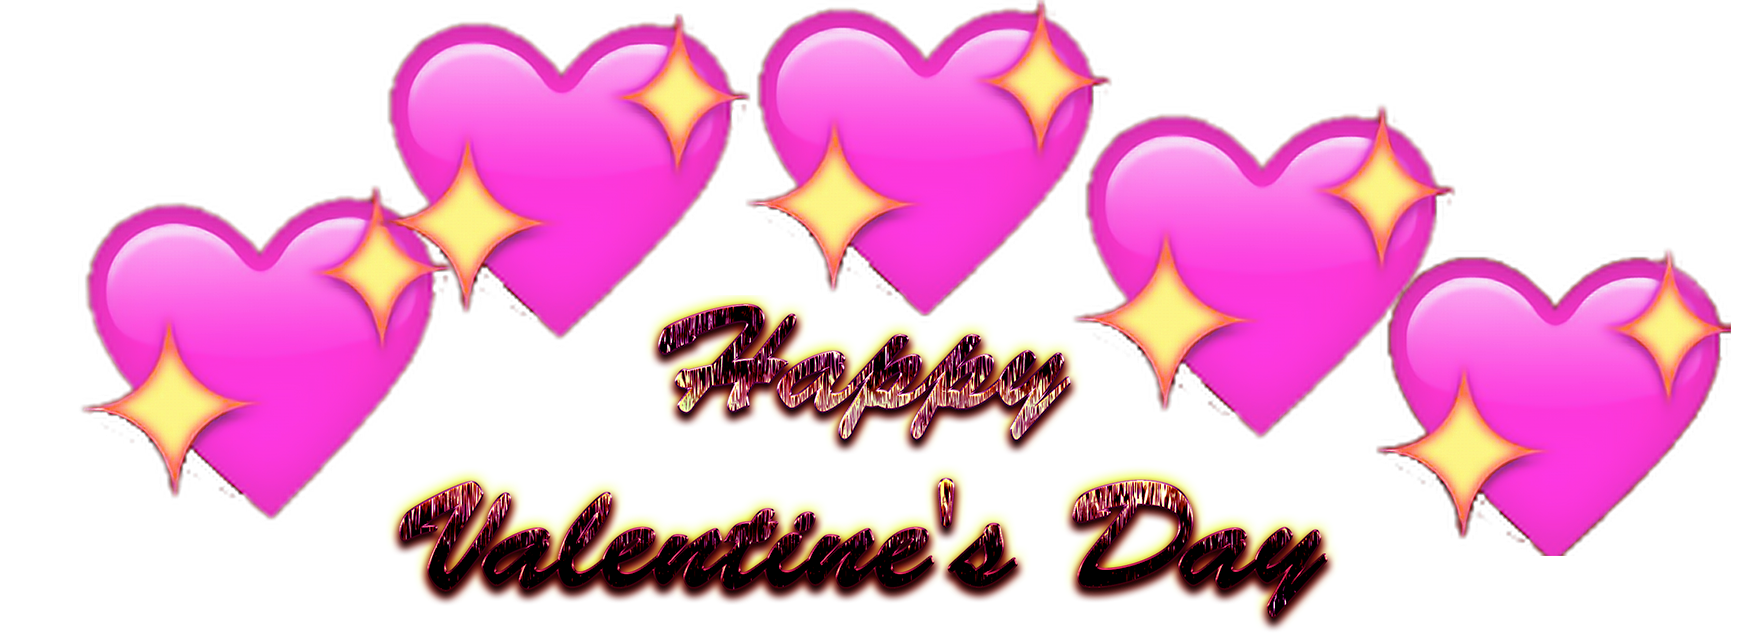 HAPPY VALENTINES DAY PNG FREE Download